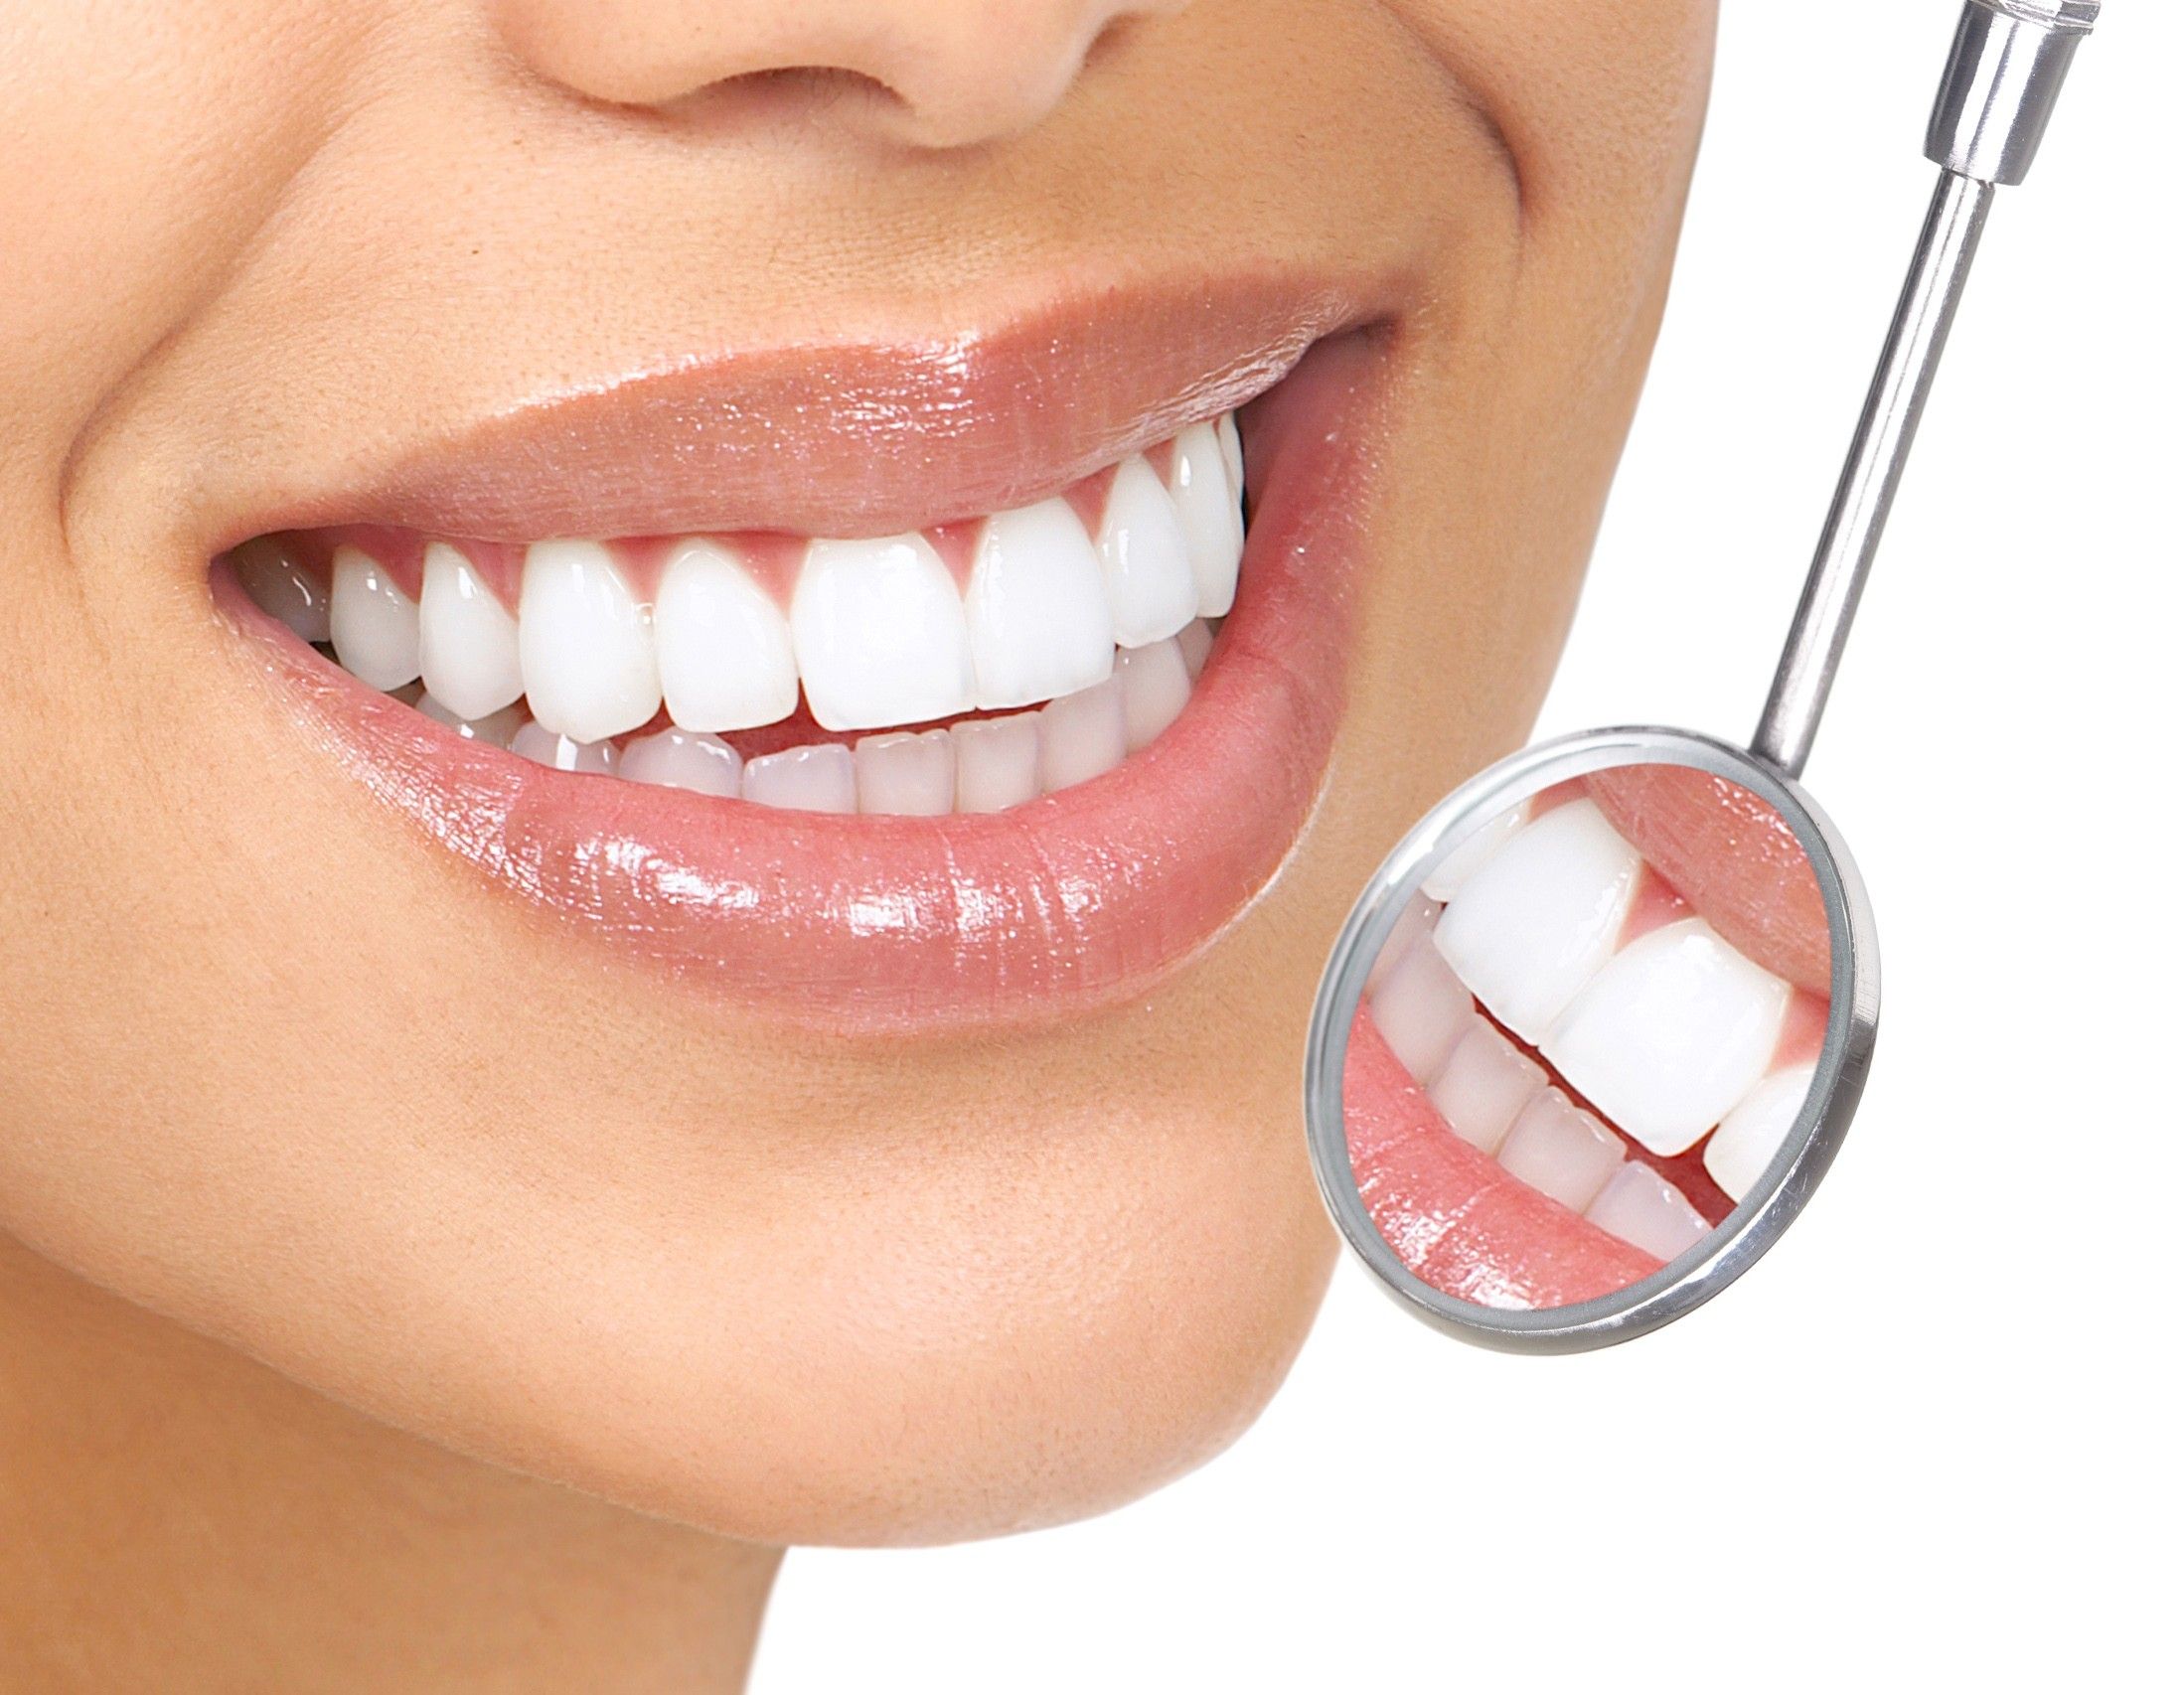 Talk to Your Dentist About Teeth Whitening in Clifton